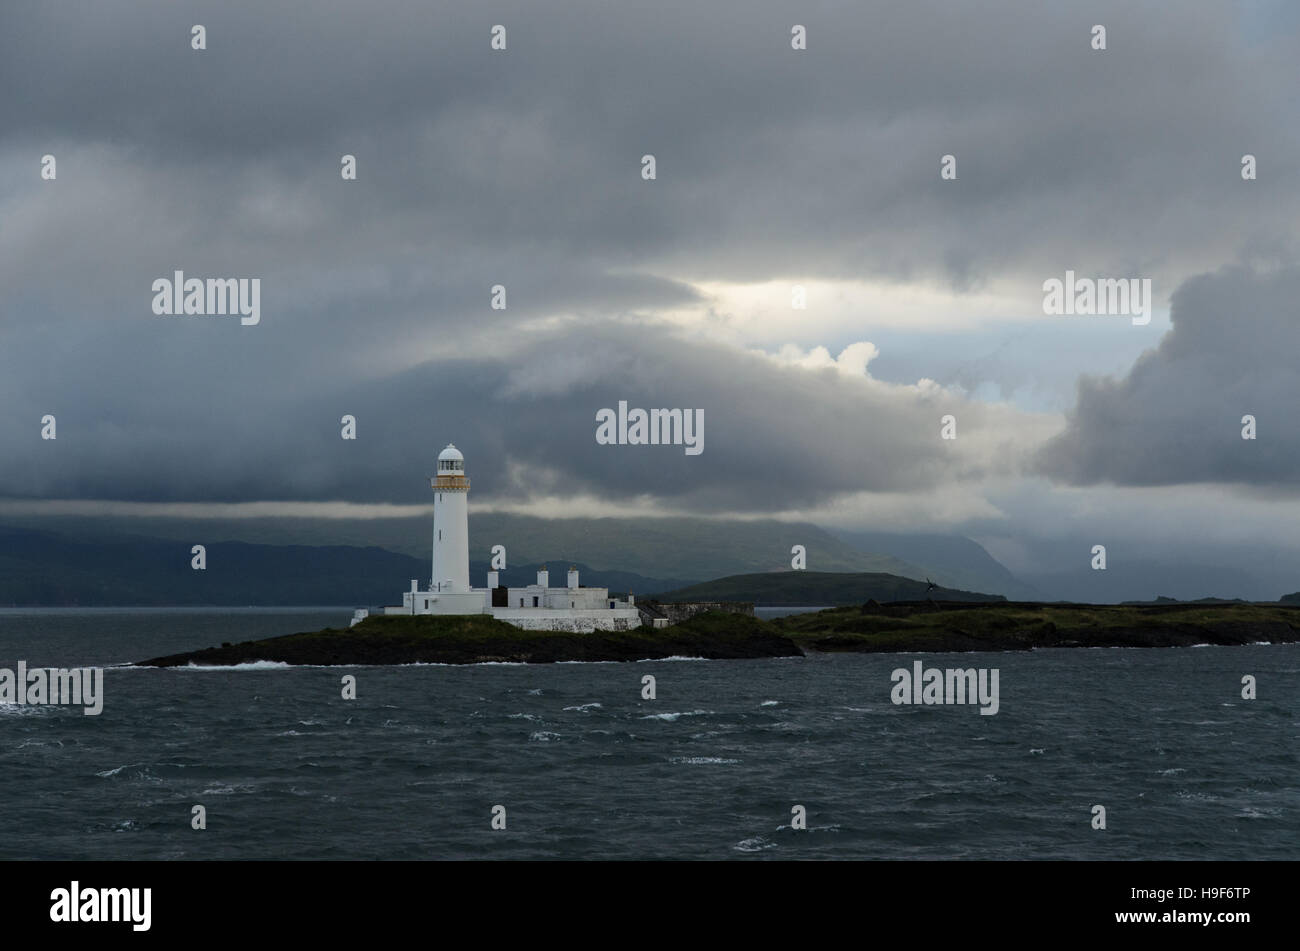 Lighthouse with early morning clouds, Isle of Mull, Scotland Stock Photo